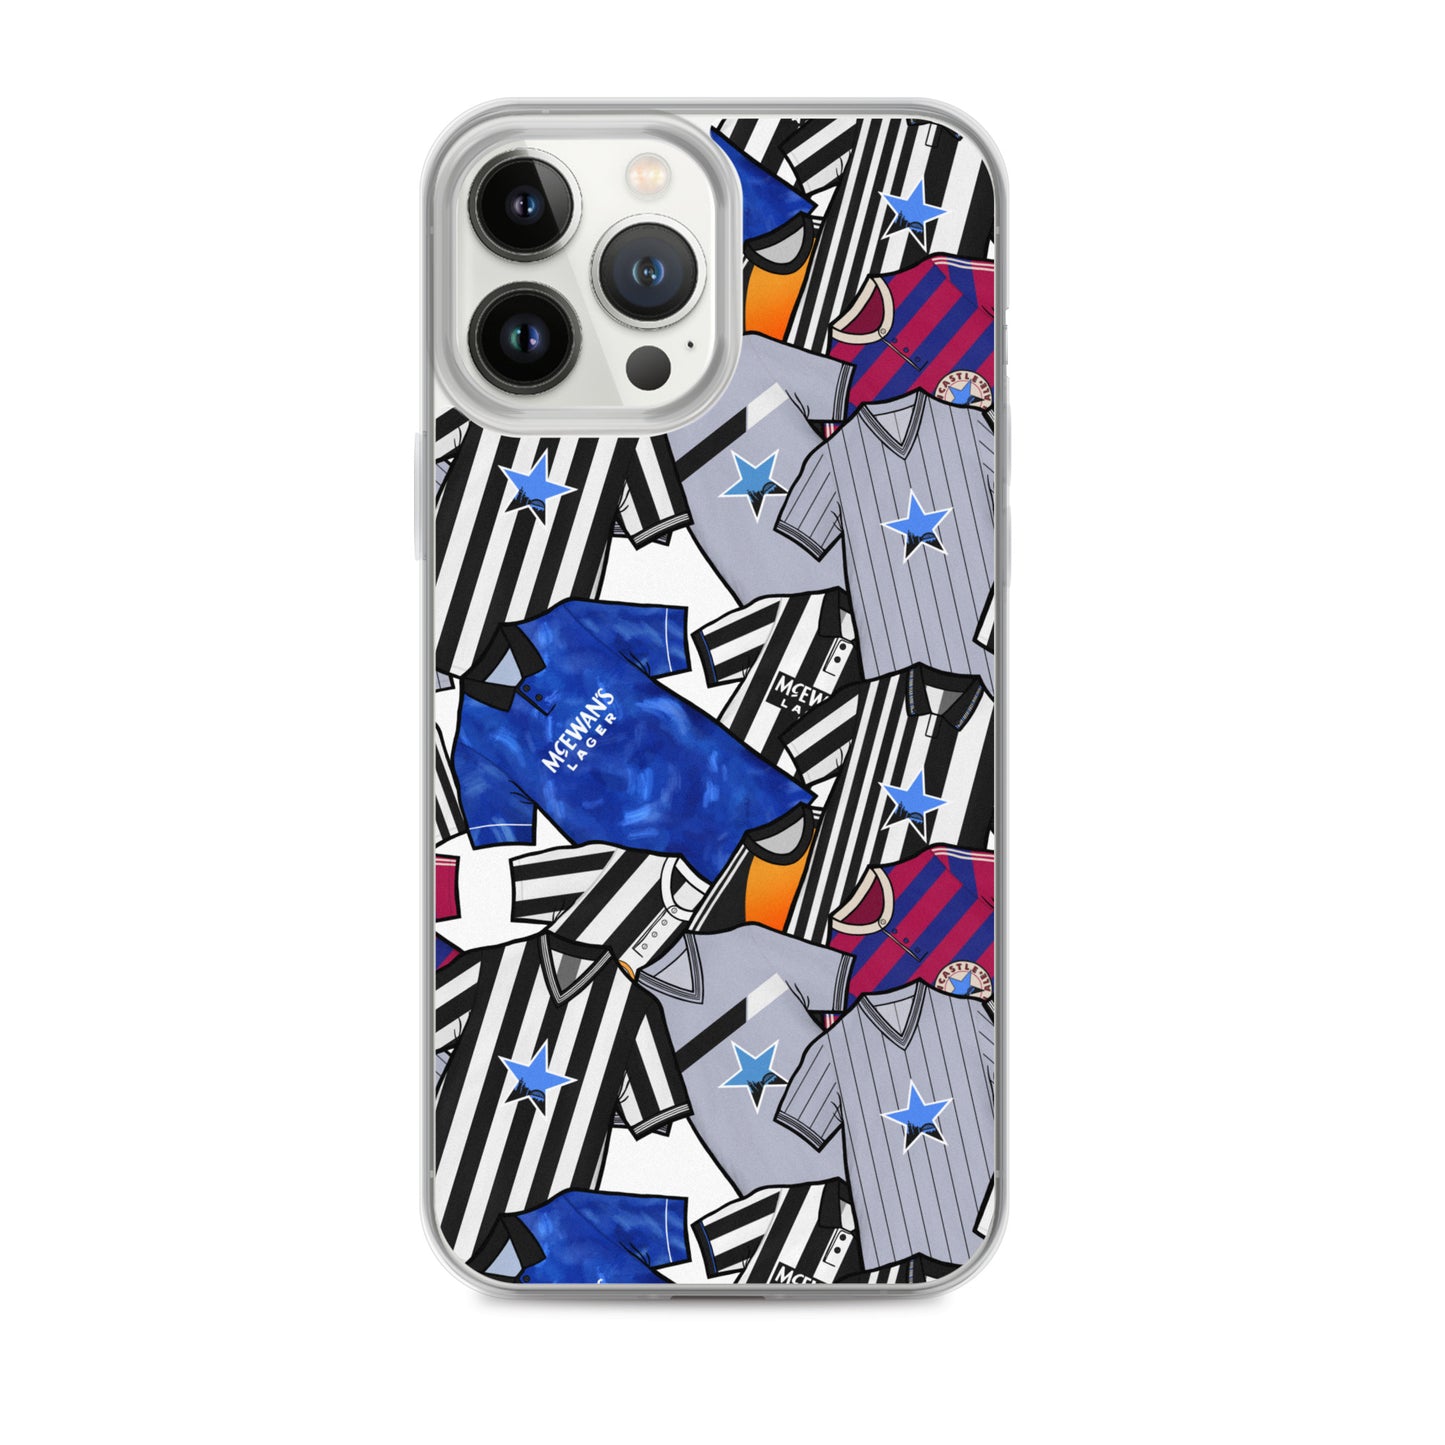 Phone case for iPhone 13 Pro Max inspired by the Retro shirts of Newcastle United!